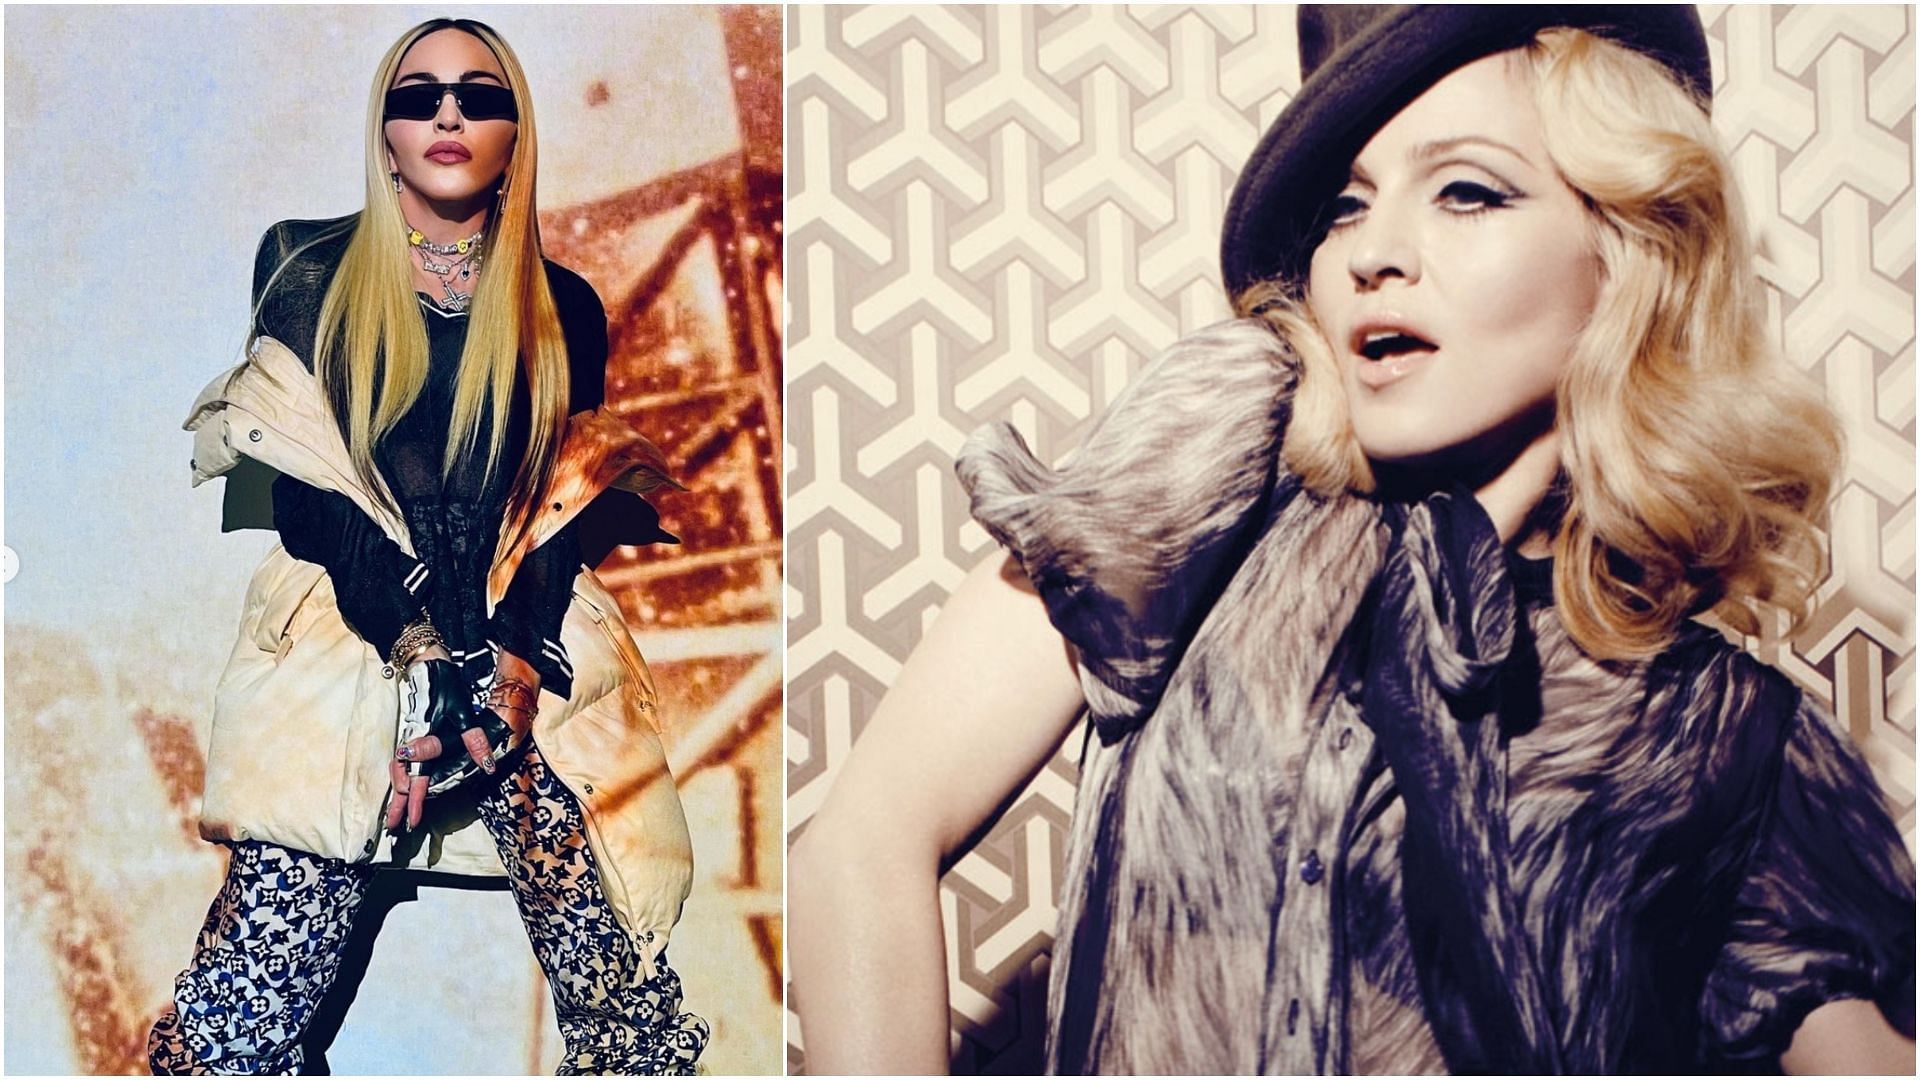 Madonna is said to hit the road this year. (Images via Getty)